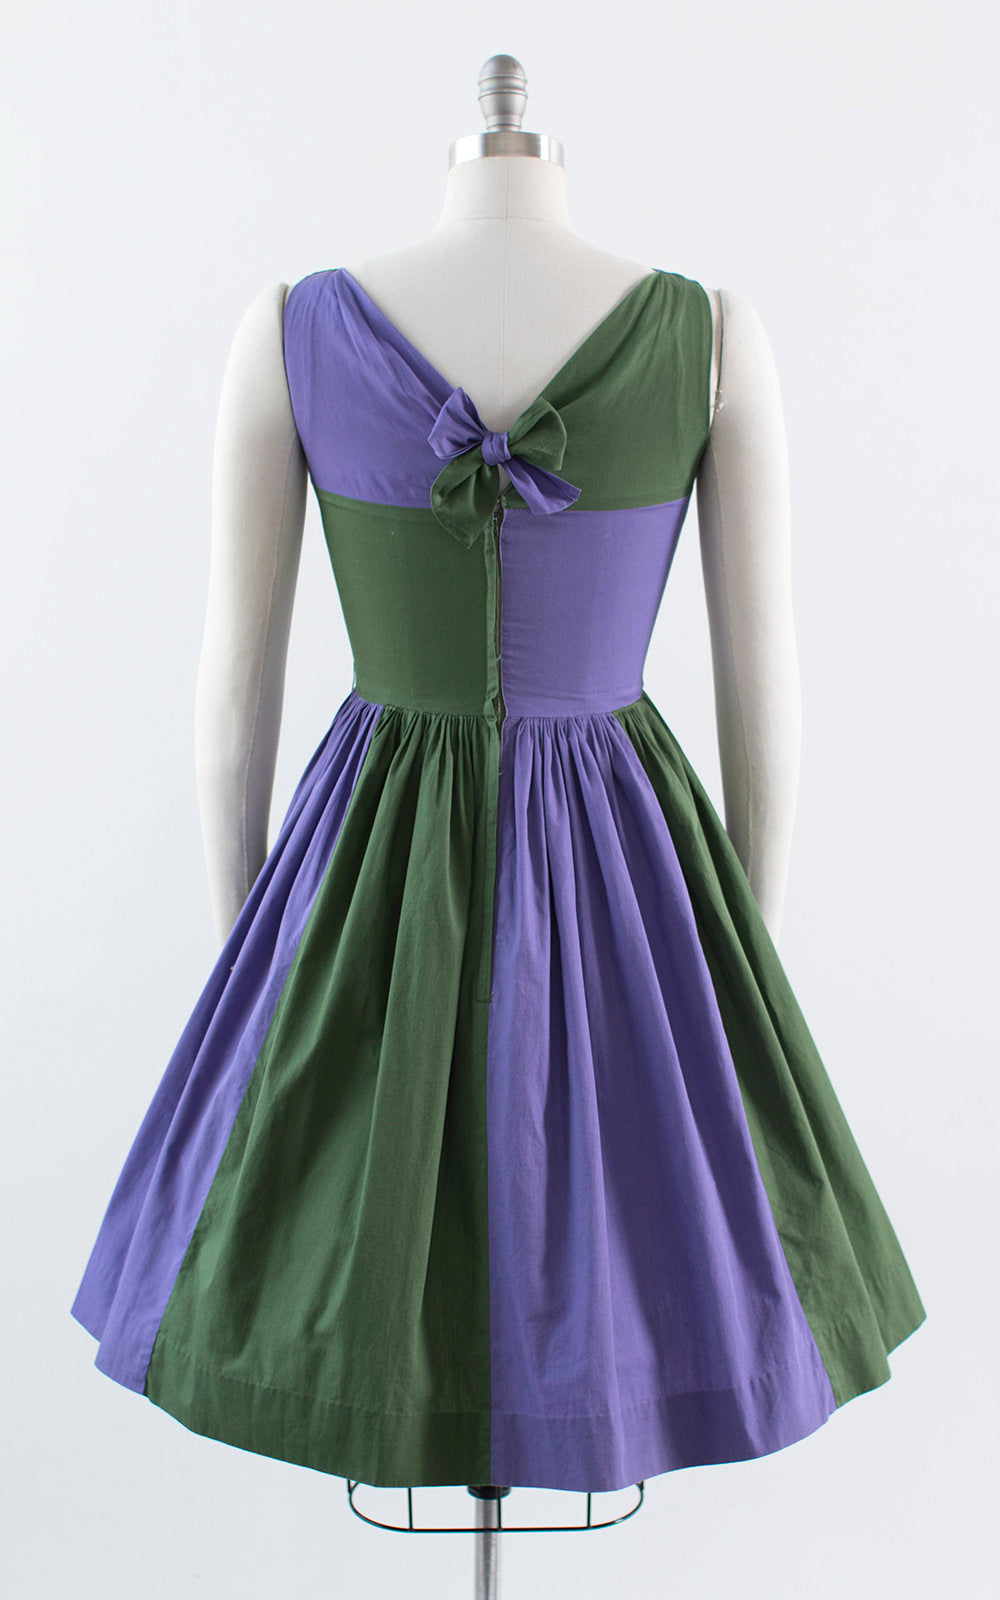 Vintage 1950s 1960s Dress | 50s 60s Color Block Cotton Purple Green Full Skirt Fit and Flare Day Dress (small)